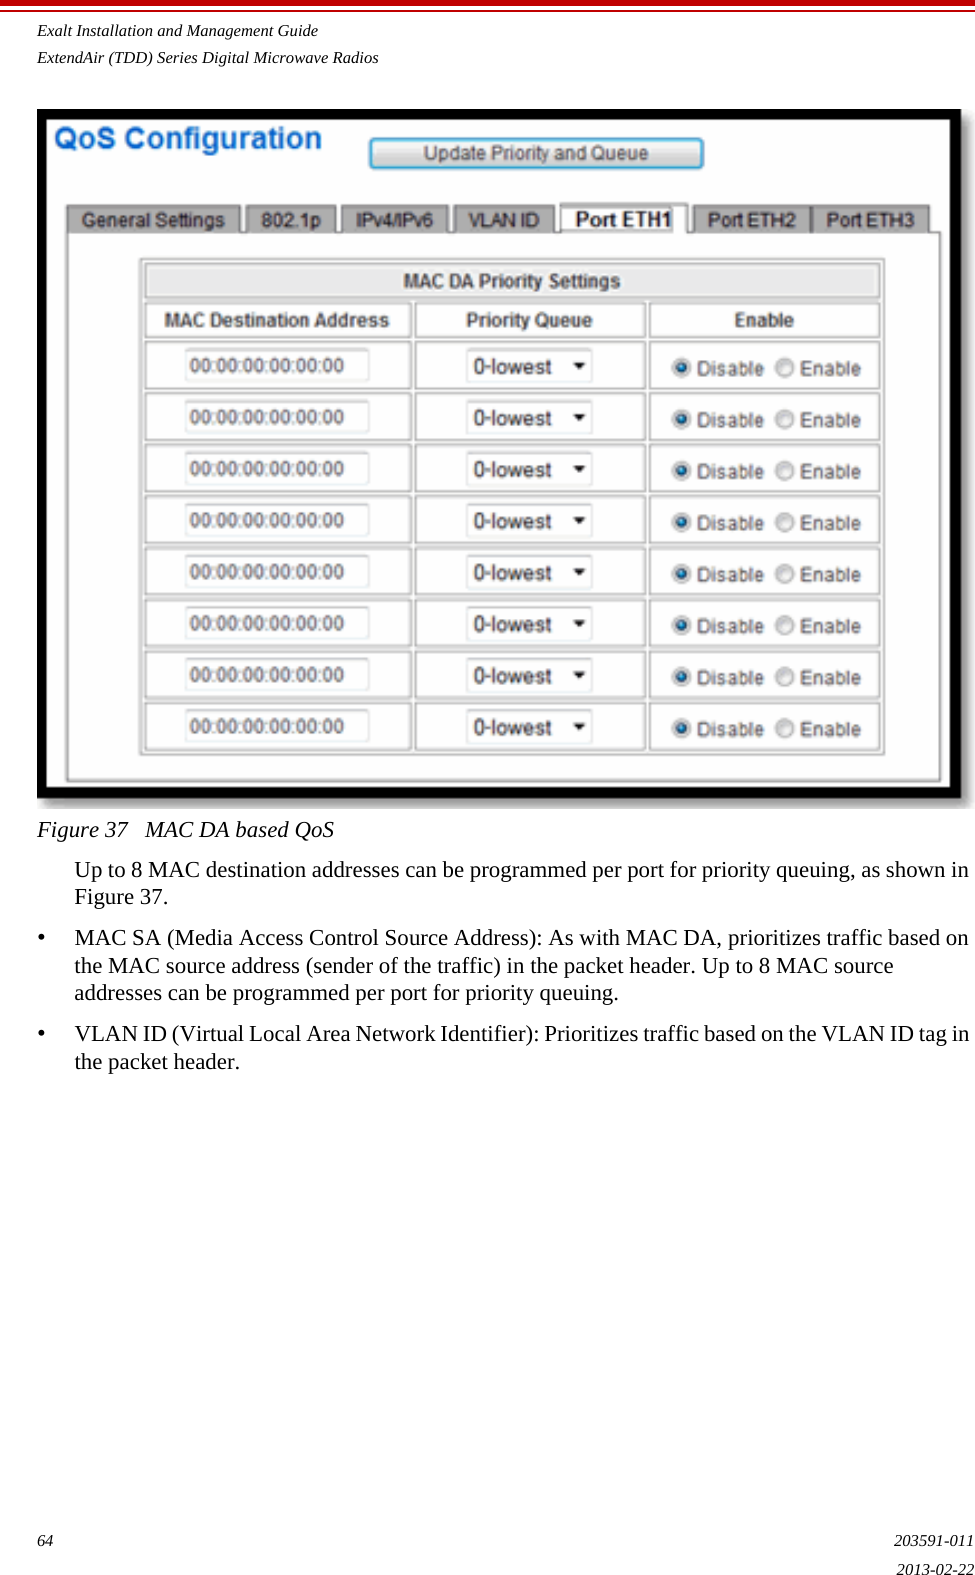 Exalt Installation and Management GuideExtendAir (TDD) Series Digital Microwave Radios64 203591-0112013-02-22Figure 37   MAC DA based QoSUp to 8 MAC destination addresses can be programmed per port for priority queuing, as shown in Figure 37.•MAC SA (Media Access Control Source Address): As with MAC DA, prioritizes traffic based on the MAC source address (sender of the traffic) in the packet header. Up to 8 MAC source addresses can be programmed per port for priority queuing.•VLAN ID (Virtual Local Area Network Identifier): Prioritizes traffic based on the VLAN ID tag in the packet header. 